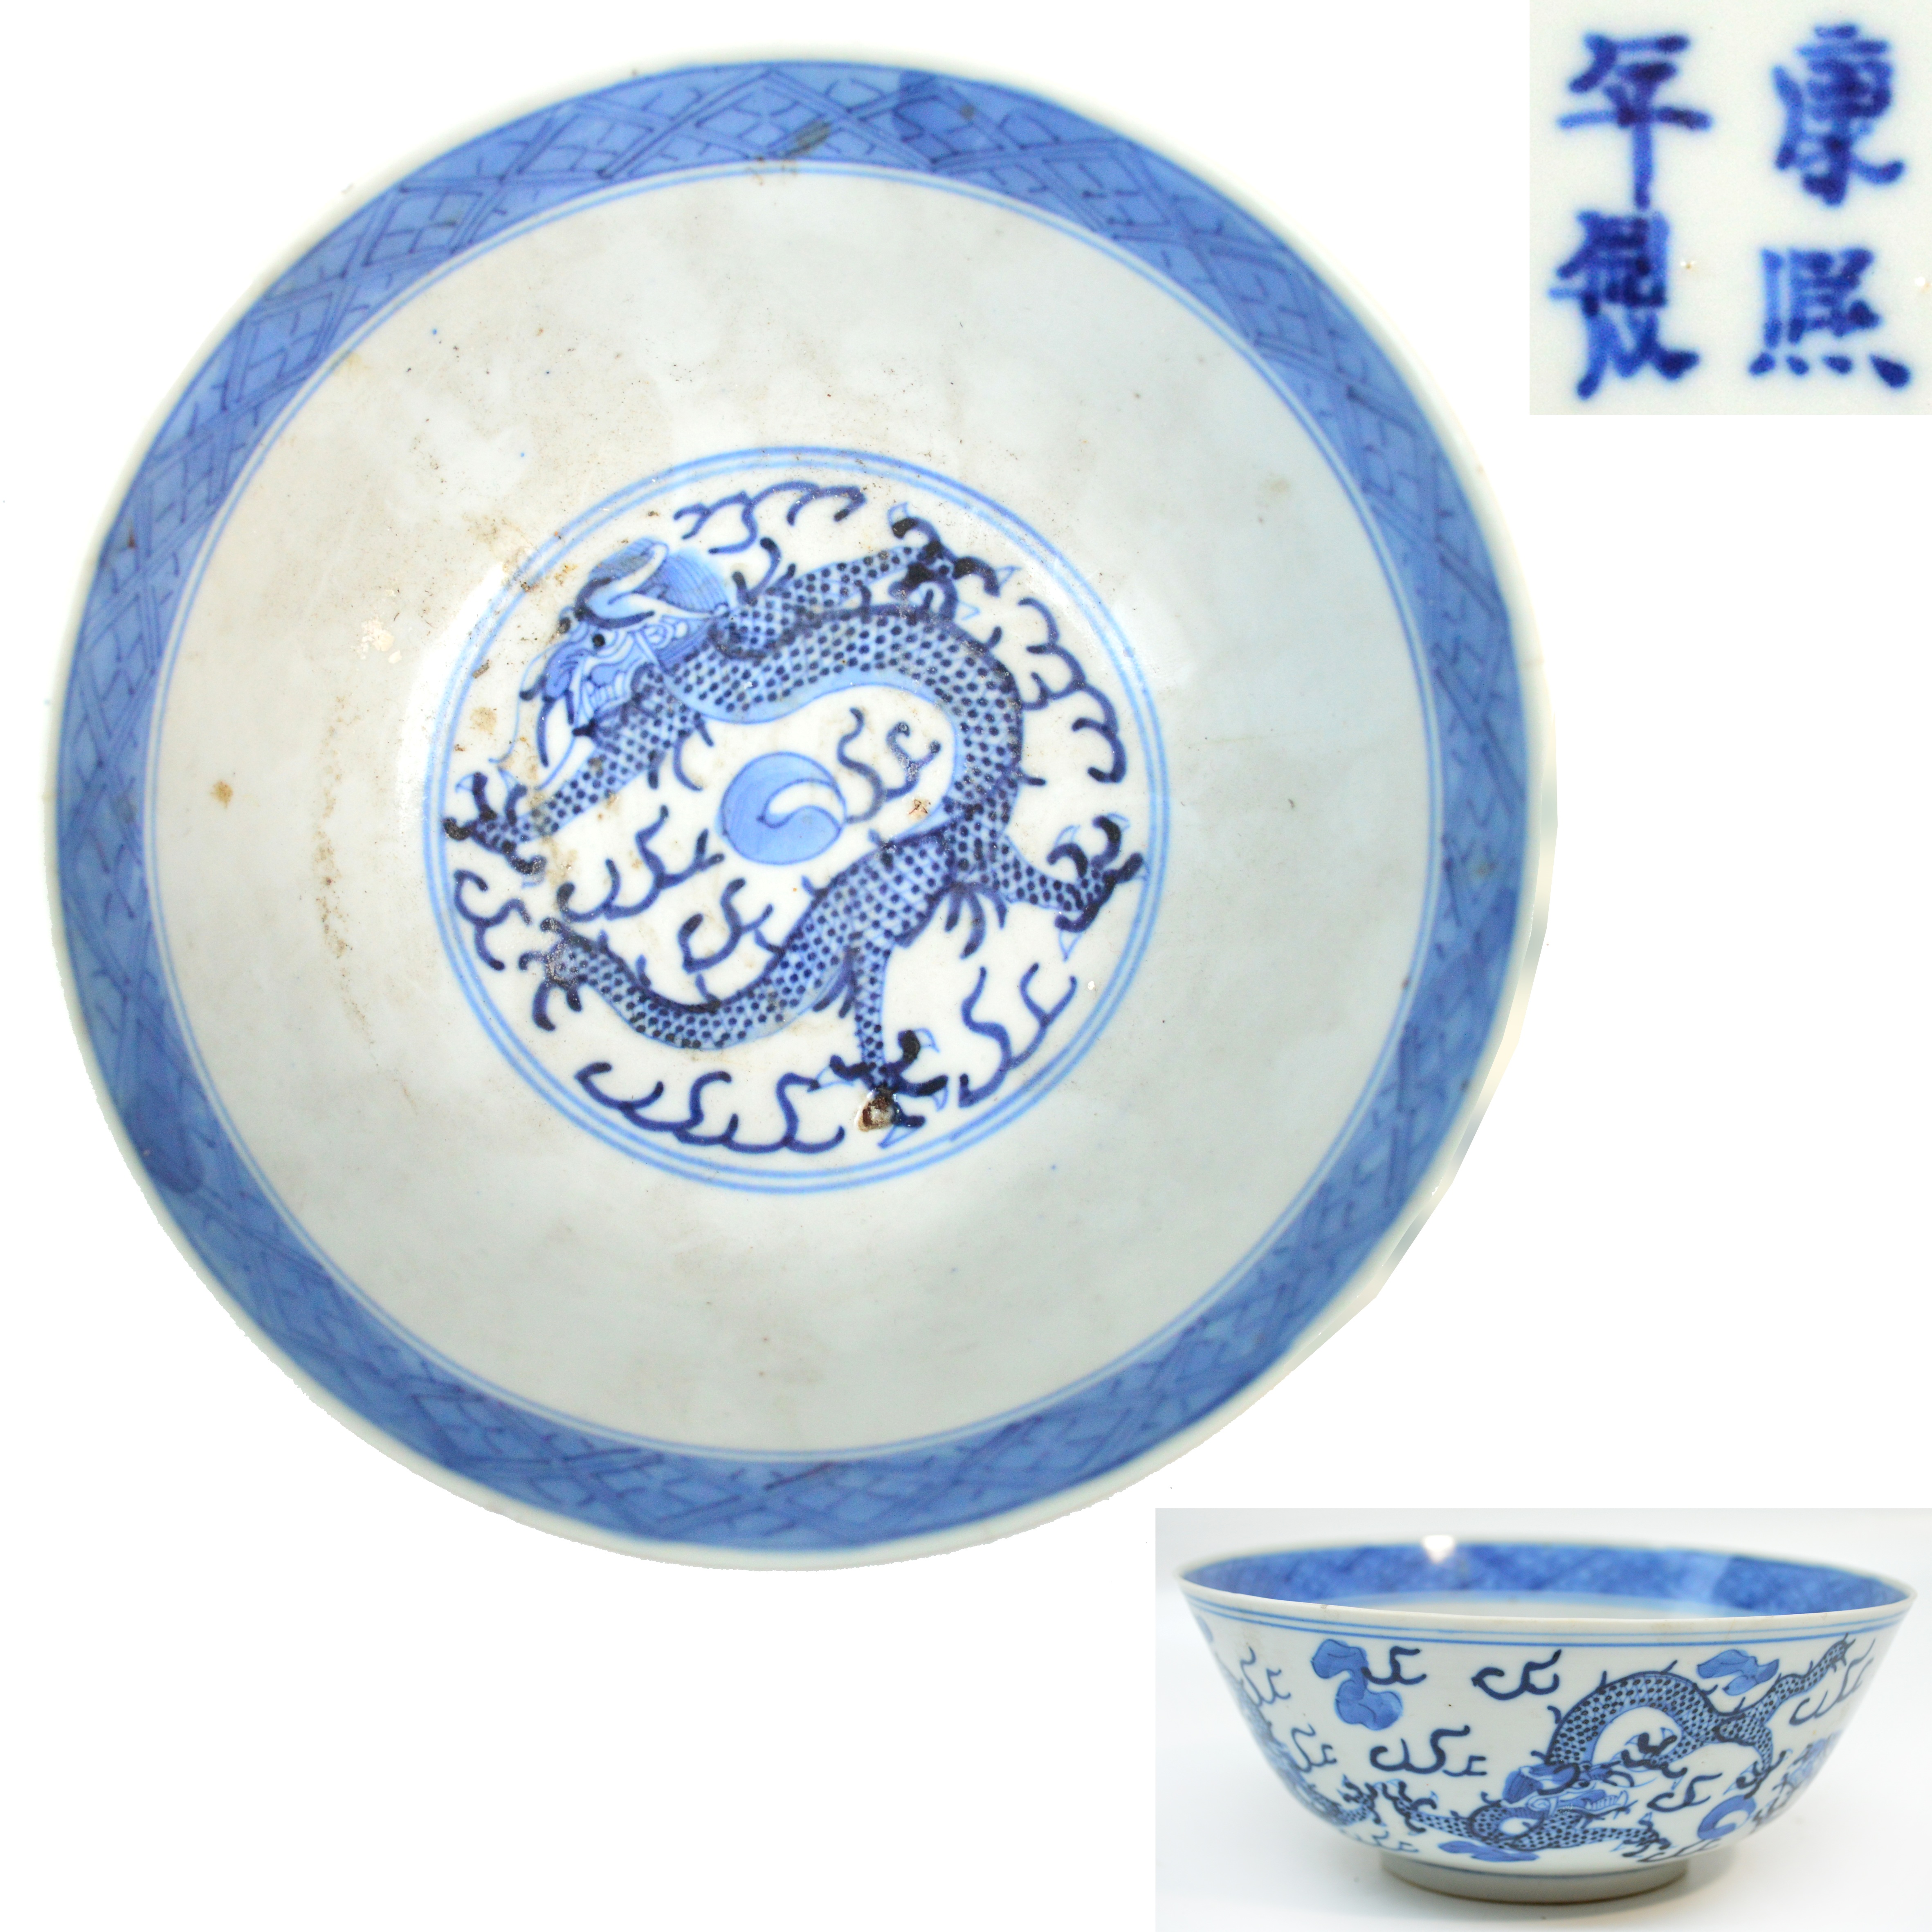 A c.1900 Chinese porcelain bowl painted in underglaze blue to the exterior with dragons chasing a